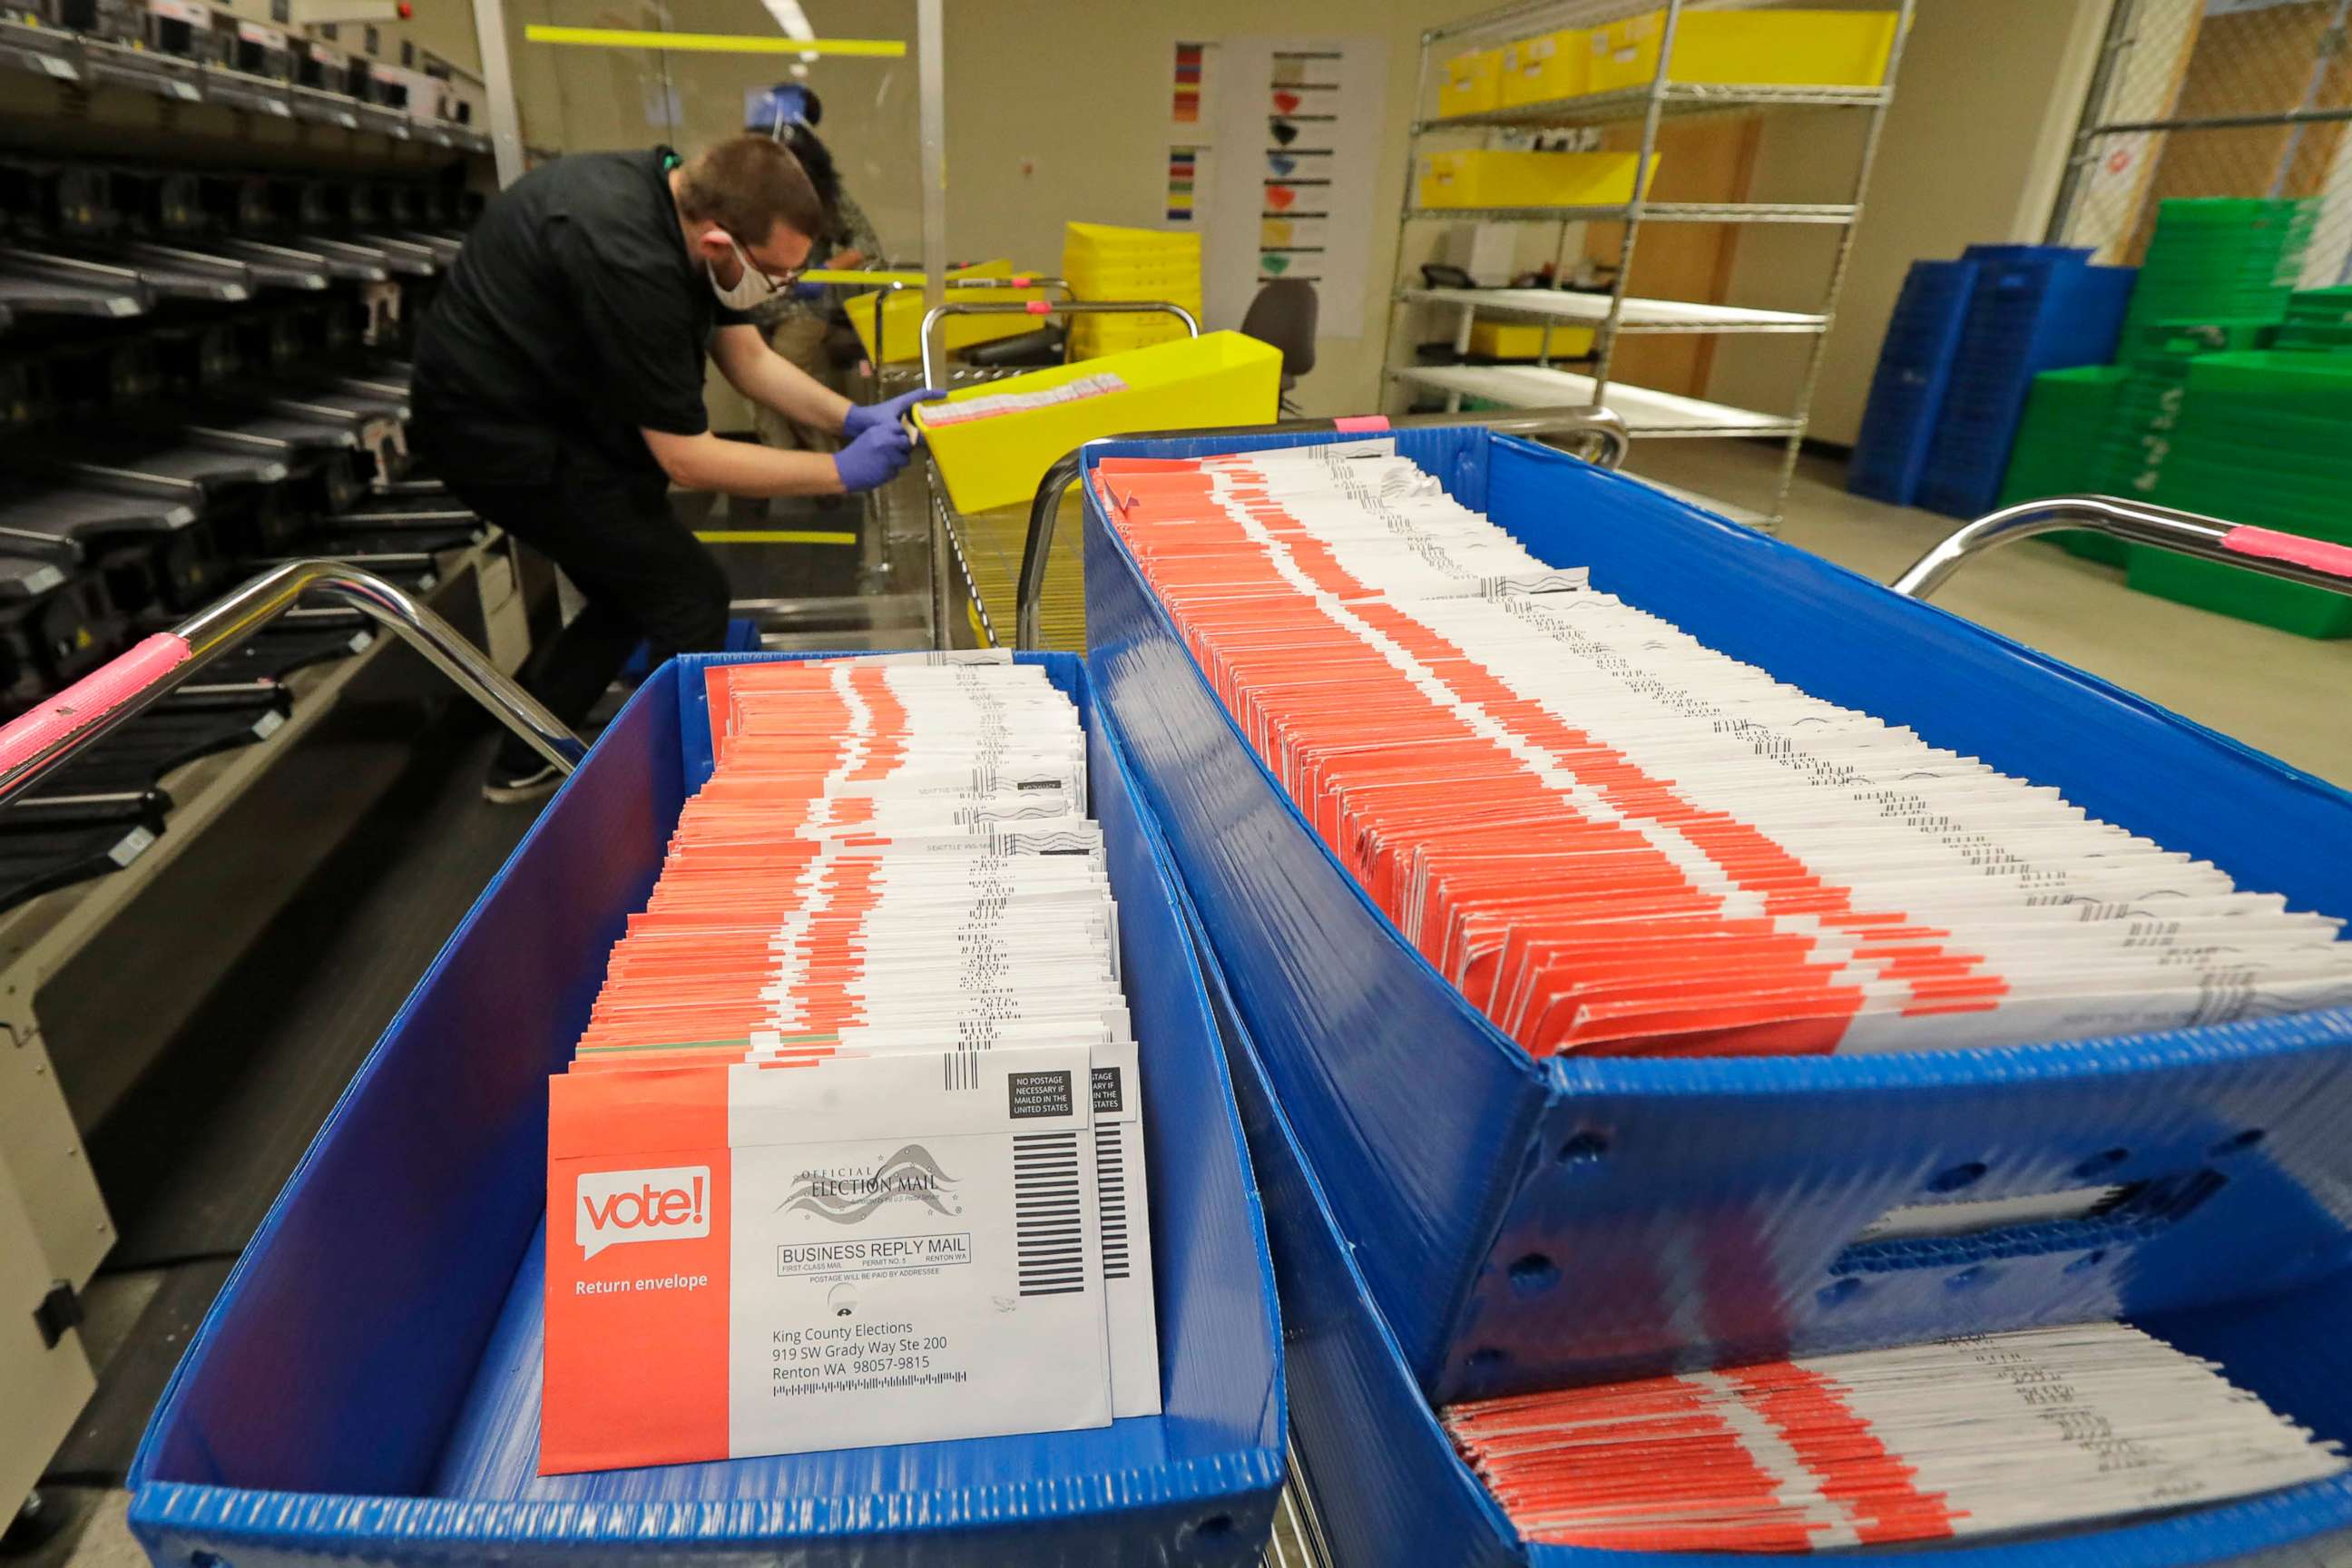 PHOTO: In this Aug. 5, 2020, file photo, vote-by-mail ballots are shown in sorting trays at the King County Elections headquarters in Renton, Wash.